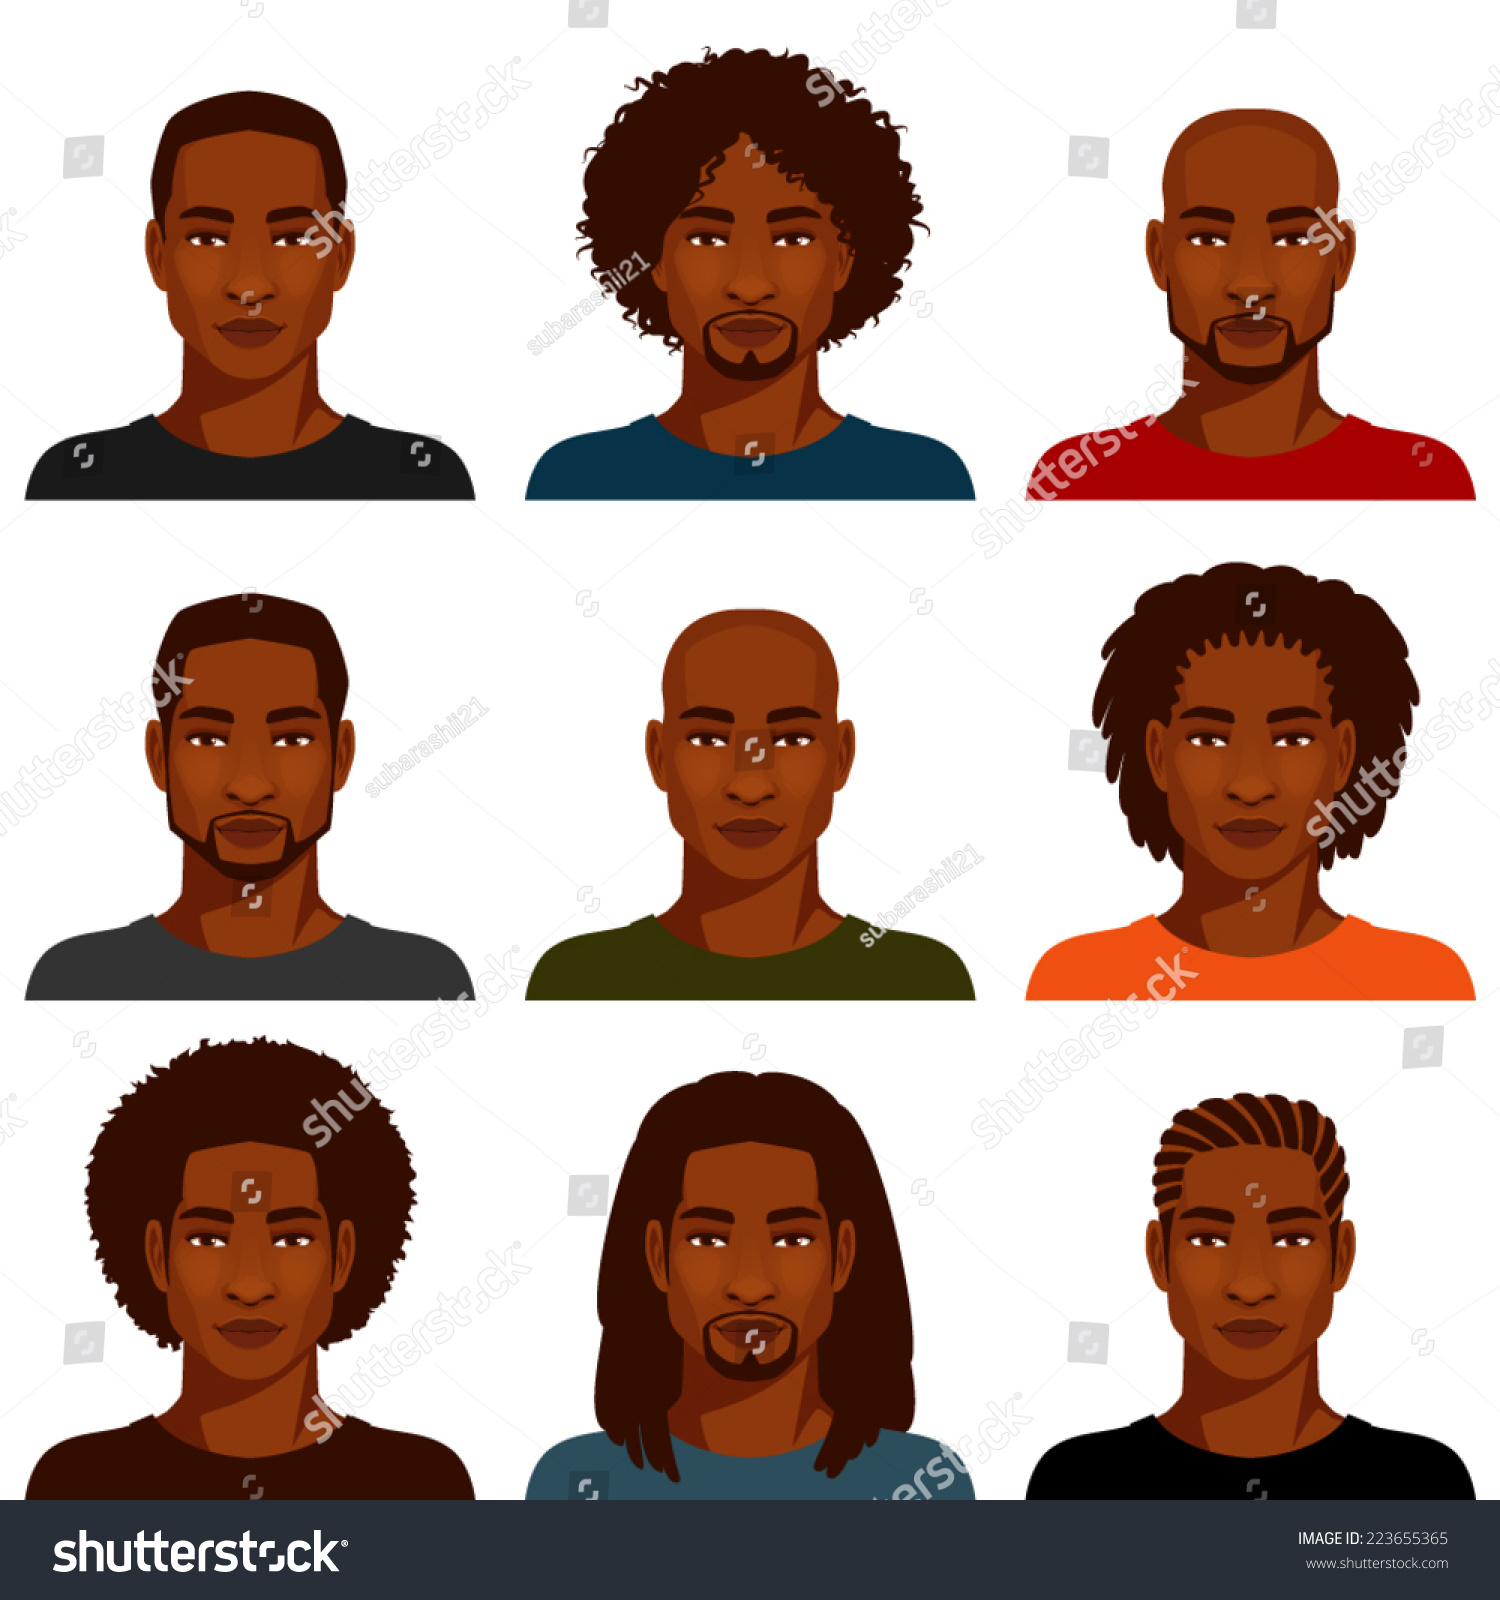 SVG of handsome young African American men with various hairstyles, suitable as avatar svg